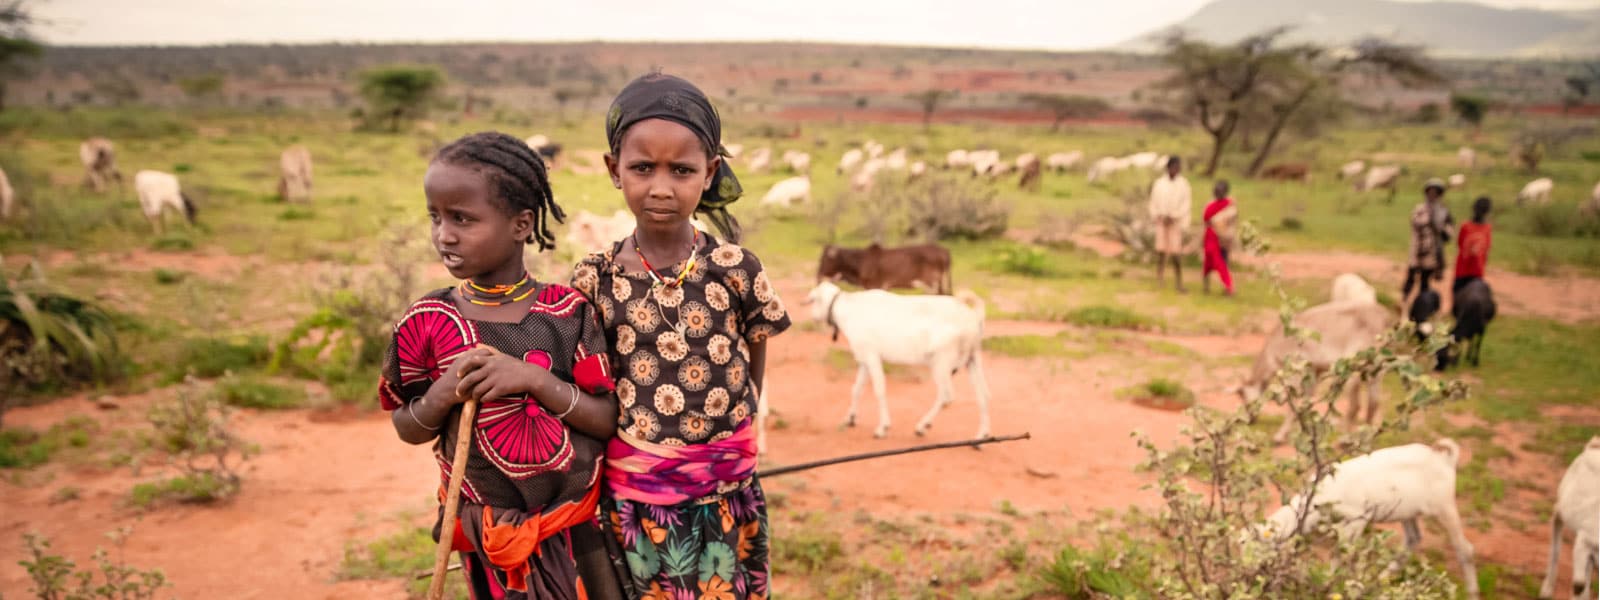 8 Ethiopia Facts Poverty, Progress, and What You Should